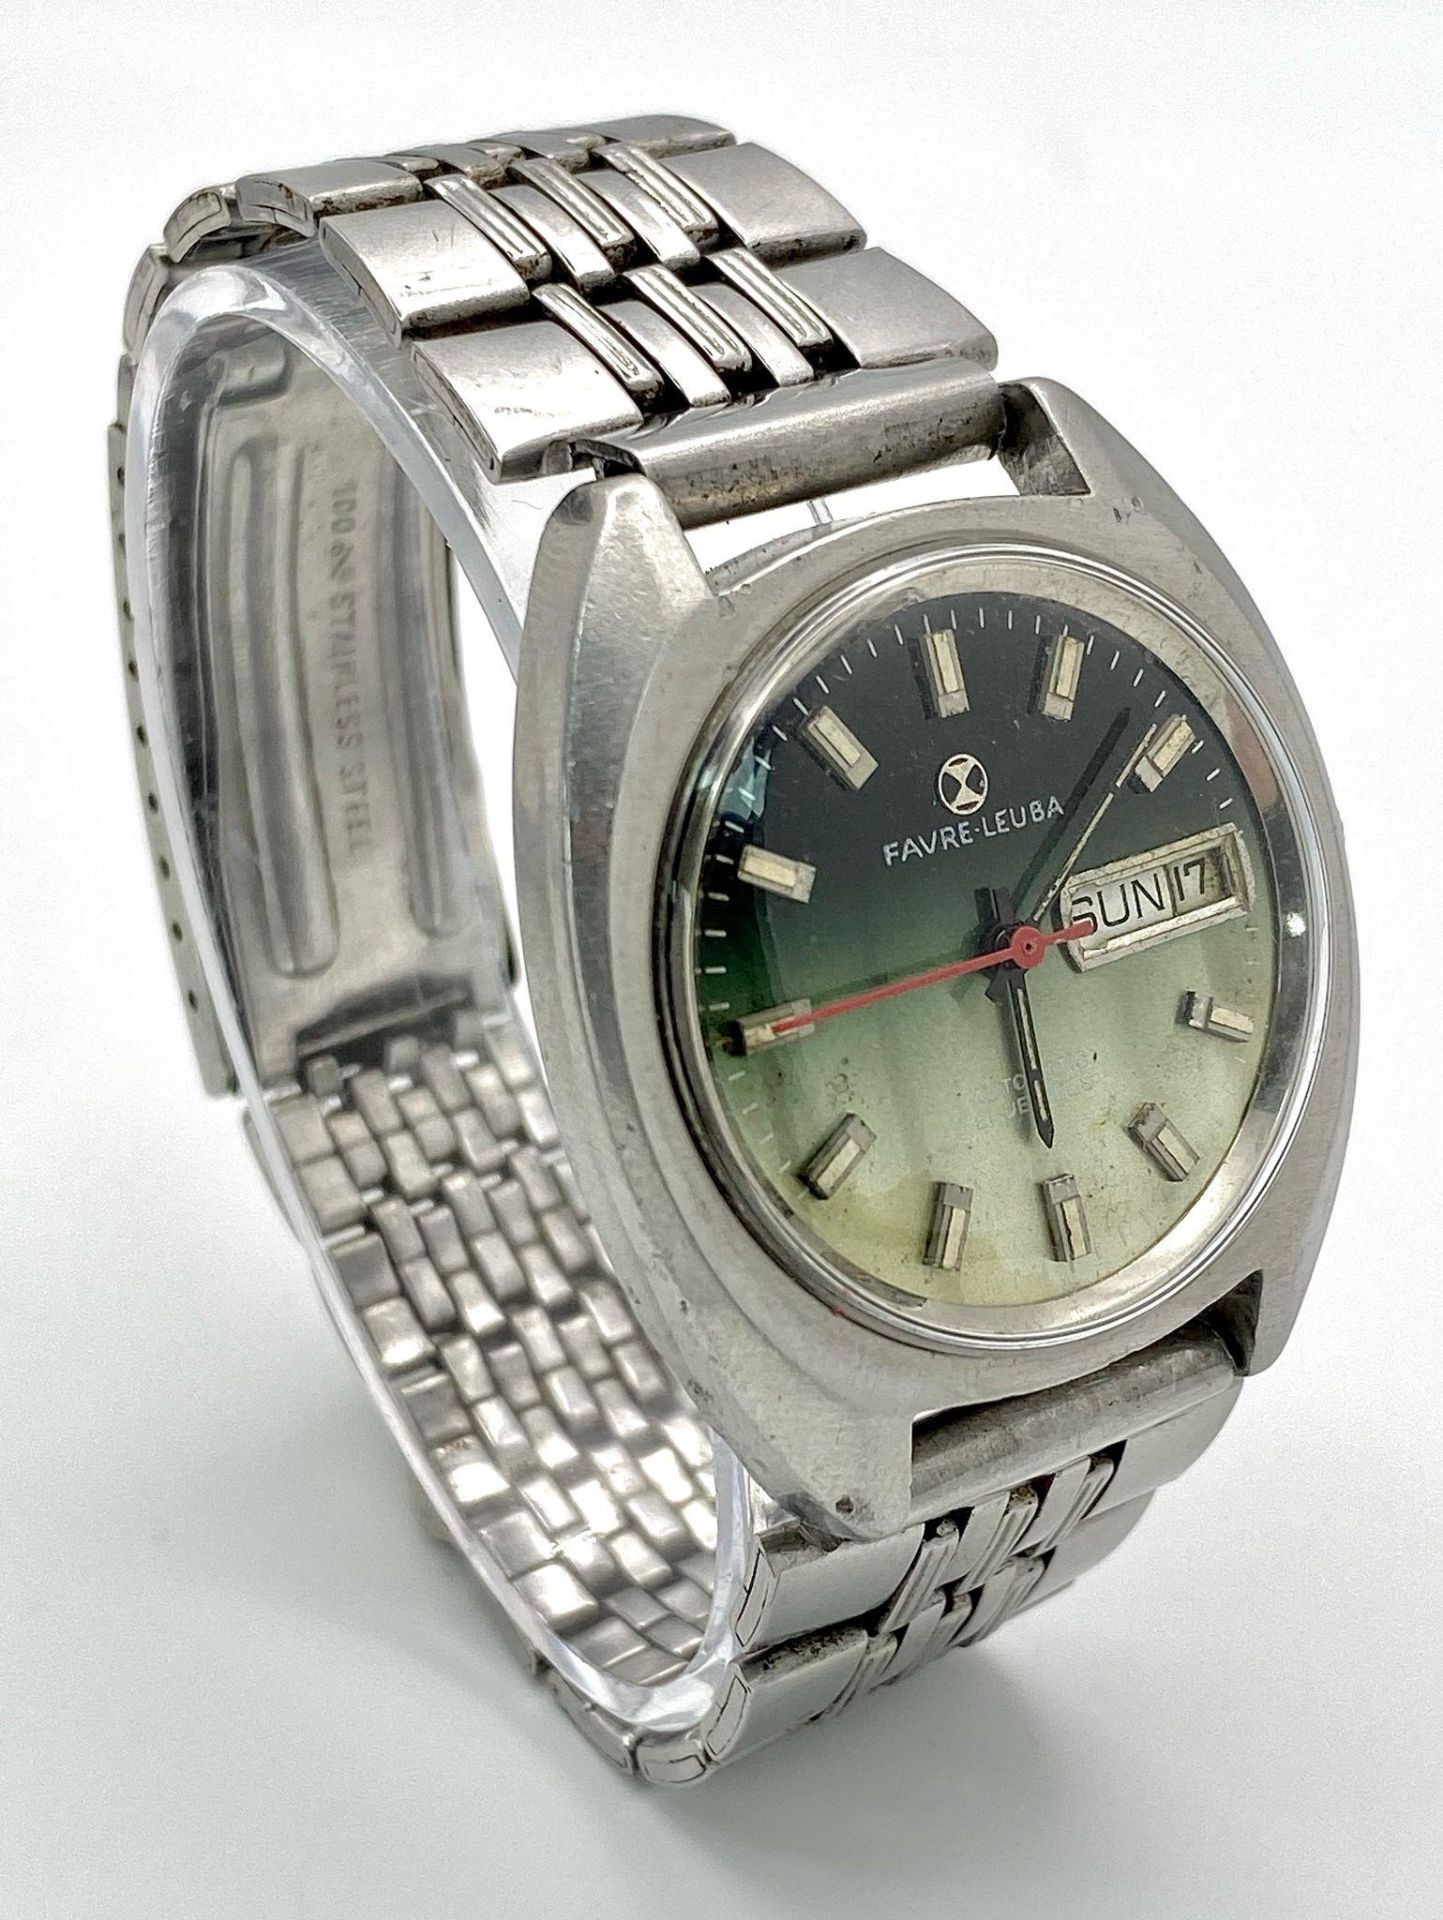 A Vintage Favre Leuba Automatic Gents Watch. Stainless steel bracelet and case - 37mm. Green dial - Image 2 of 6